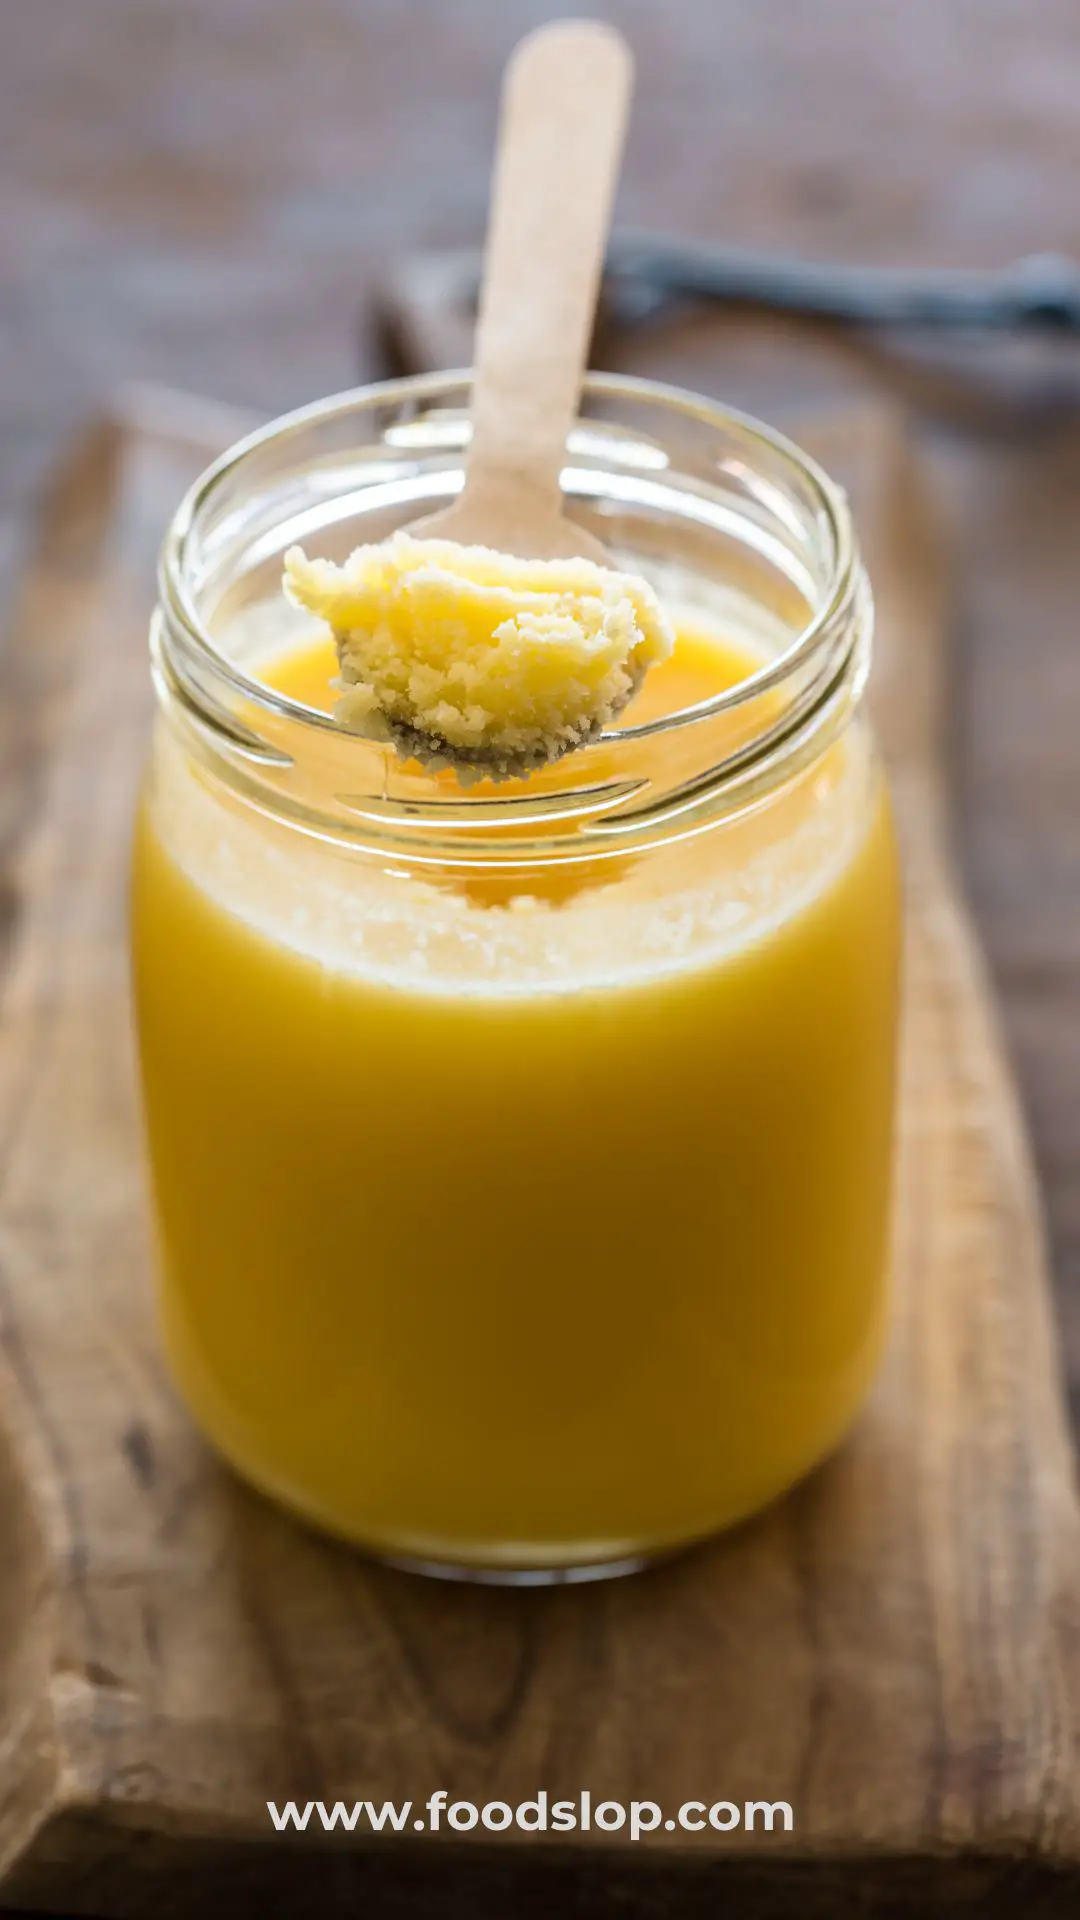 Does Ghee Go Bad?